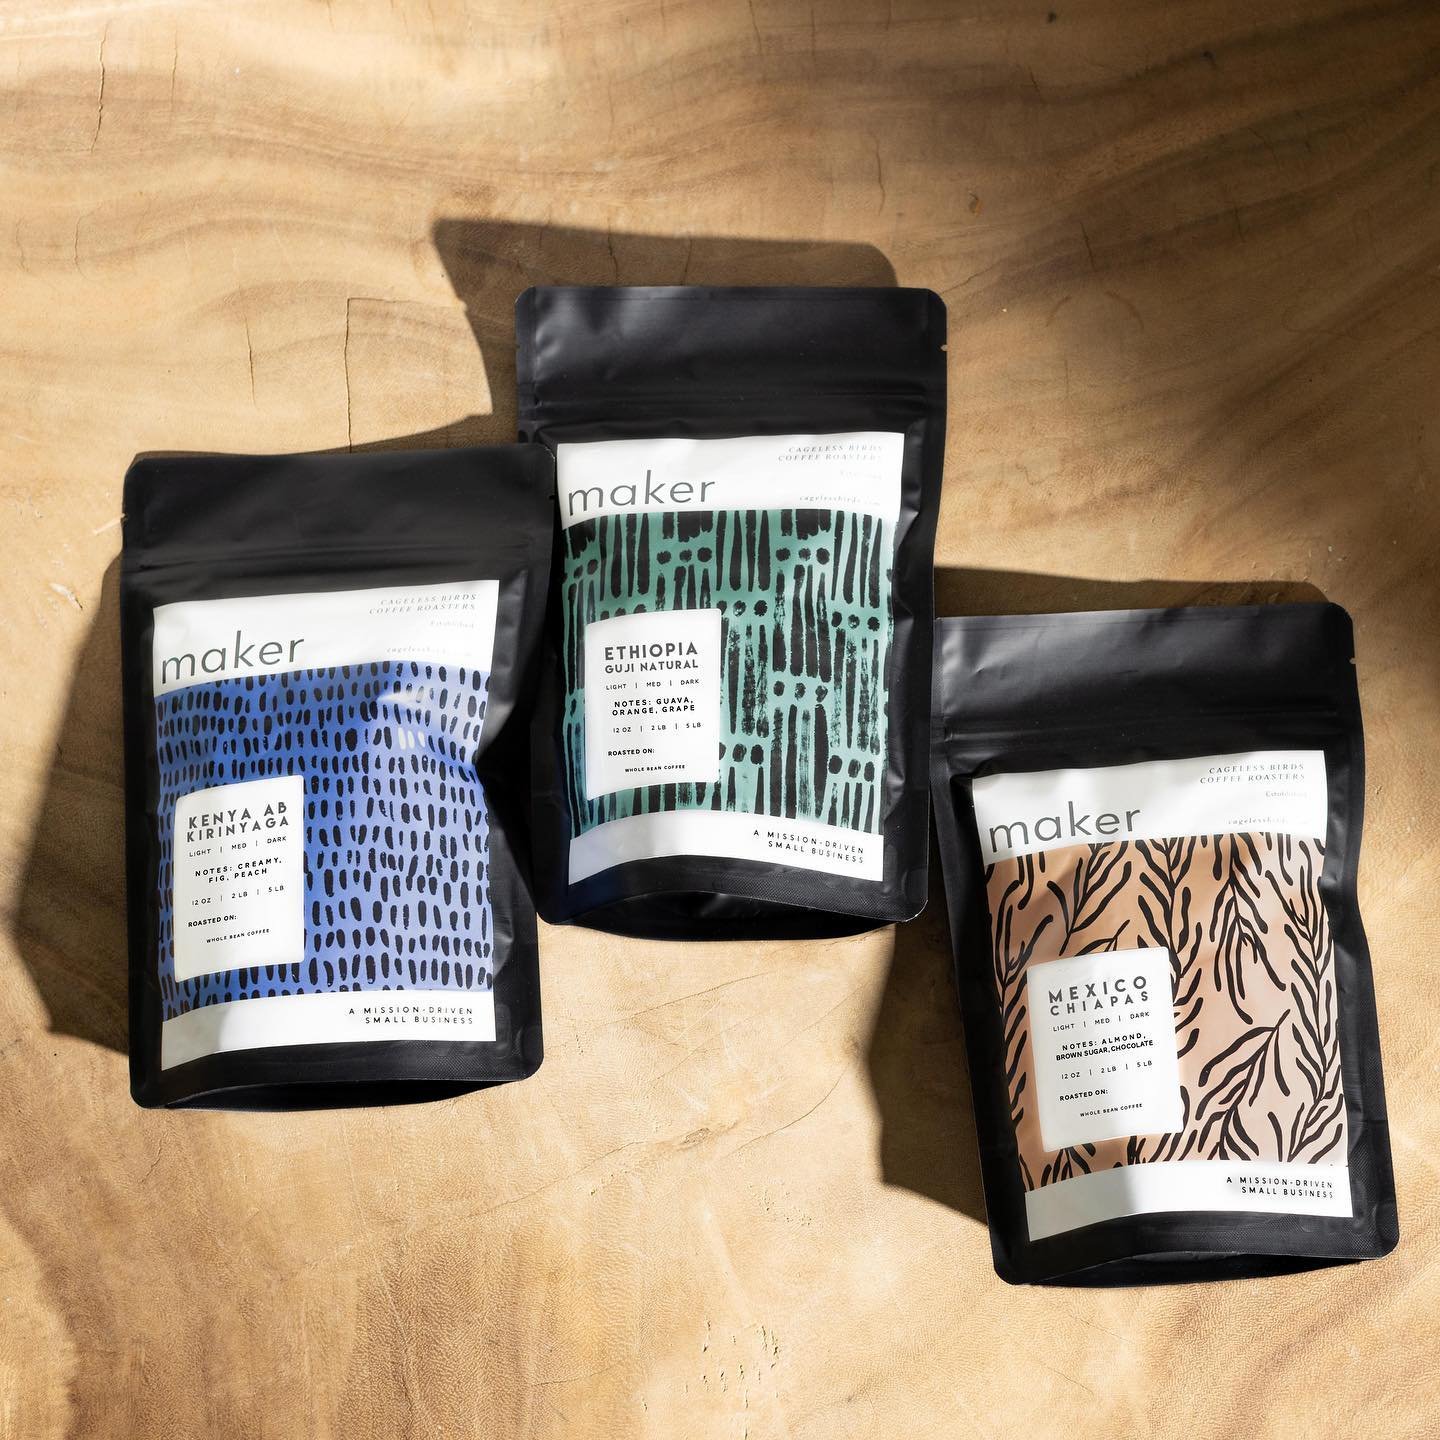 Check out our NEW @makercoffee labels! ☕️ You can get 3 of our favorite single-origin coffees from around the world in our Tasting Trio sampling set. 

Our bags are designed and our coffee is roasted in the heart of North Carolina by our @cagelessbir